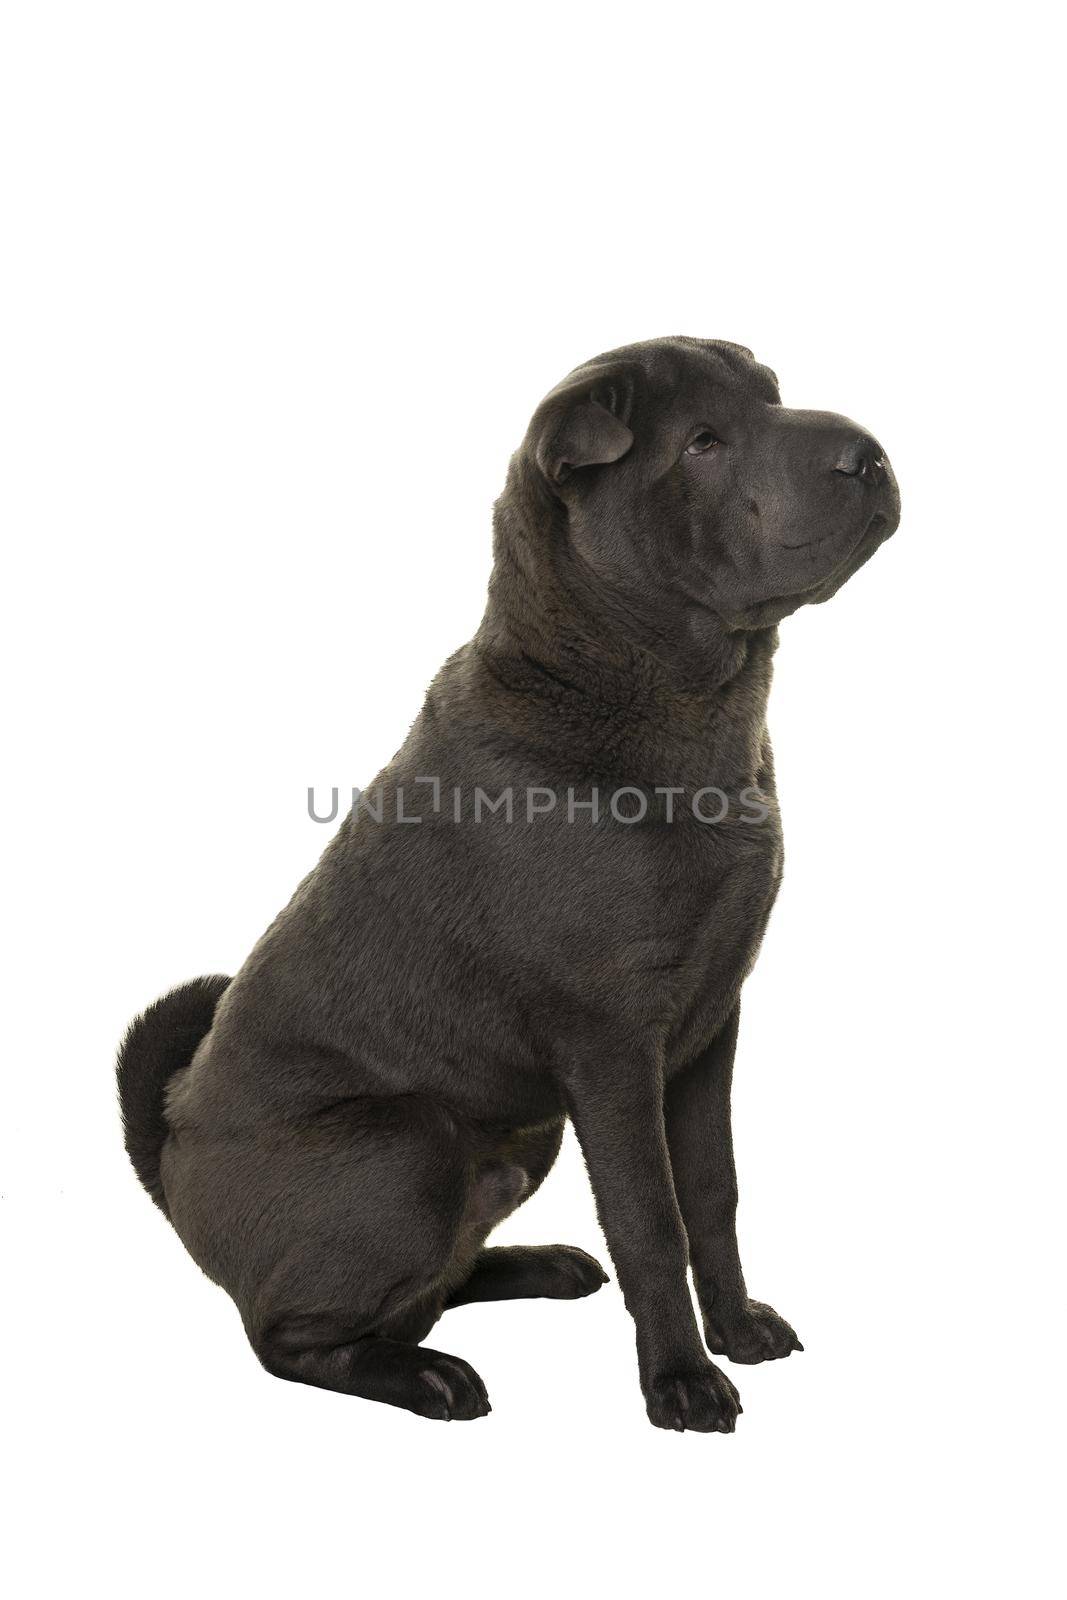 Sitting grey Shar Pei dog looking away isolated on a white background by LeoniekvanderVliet